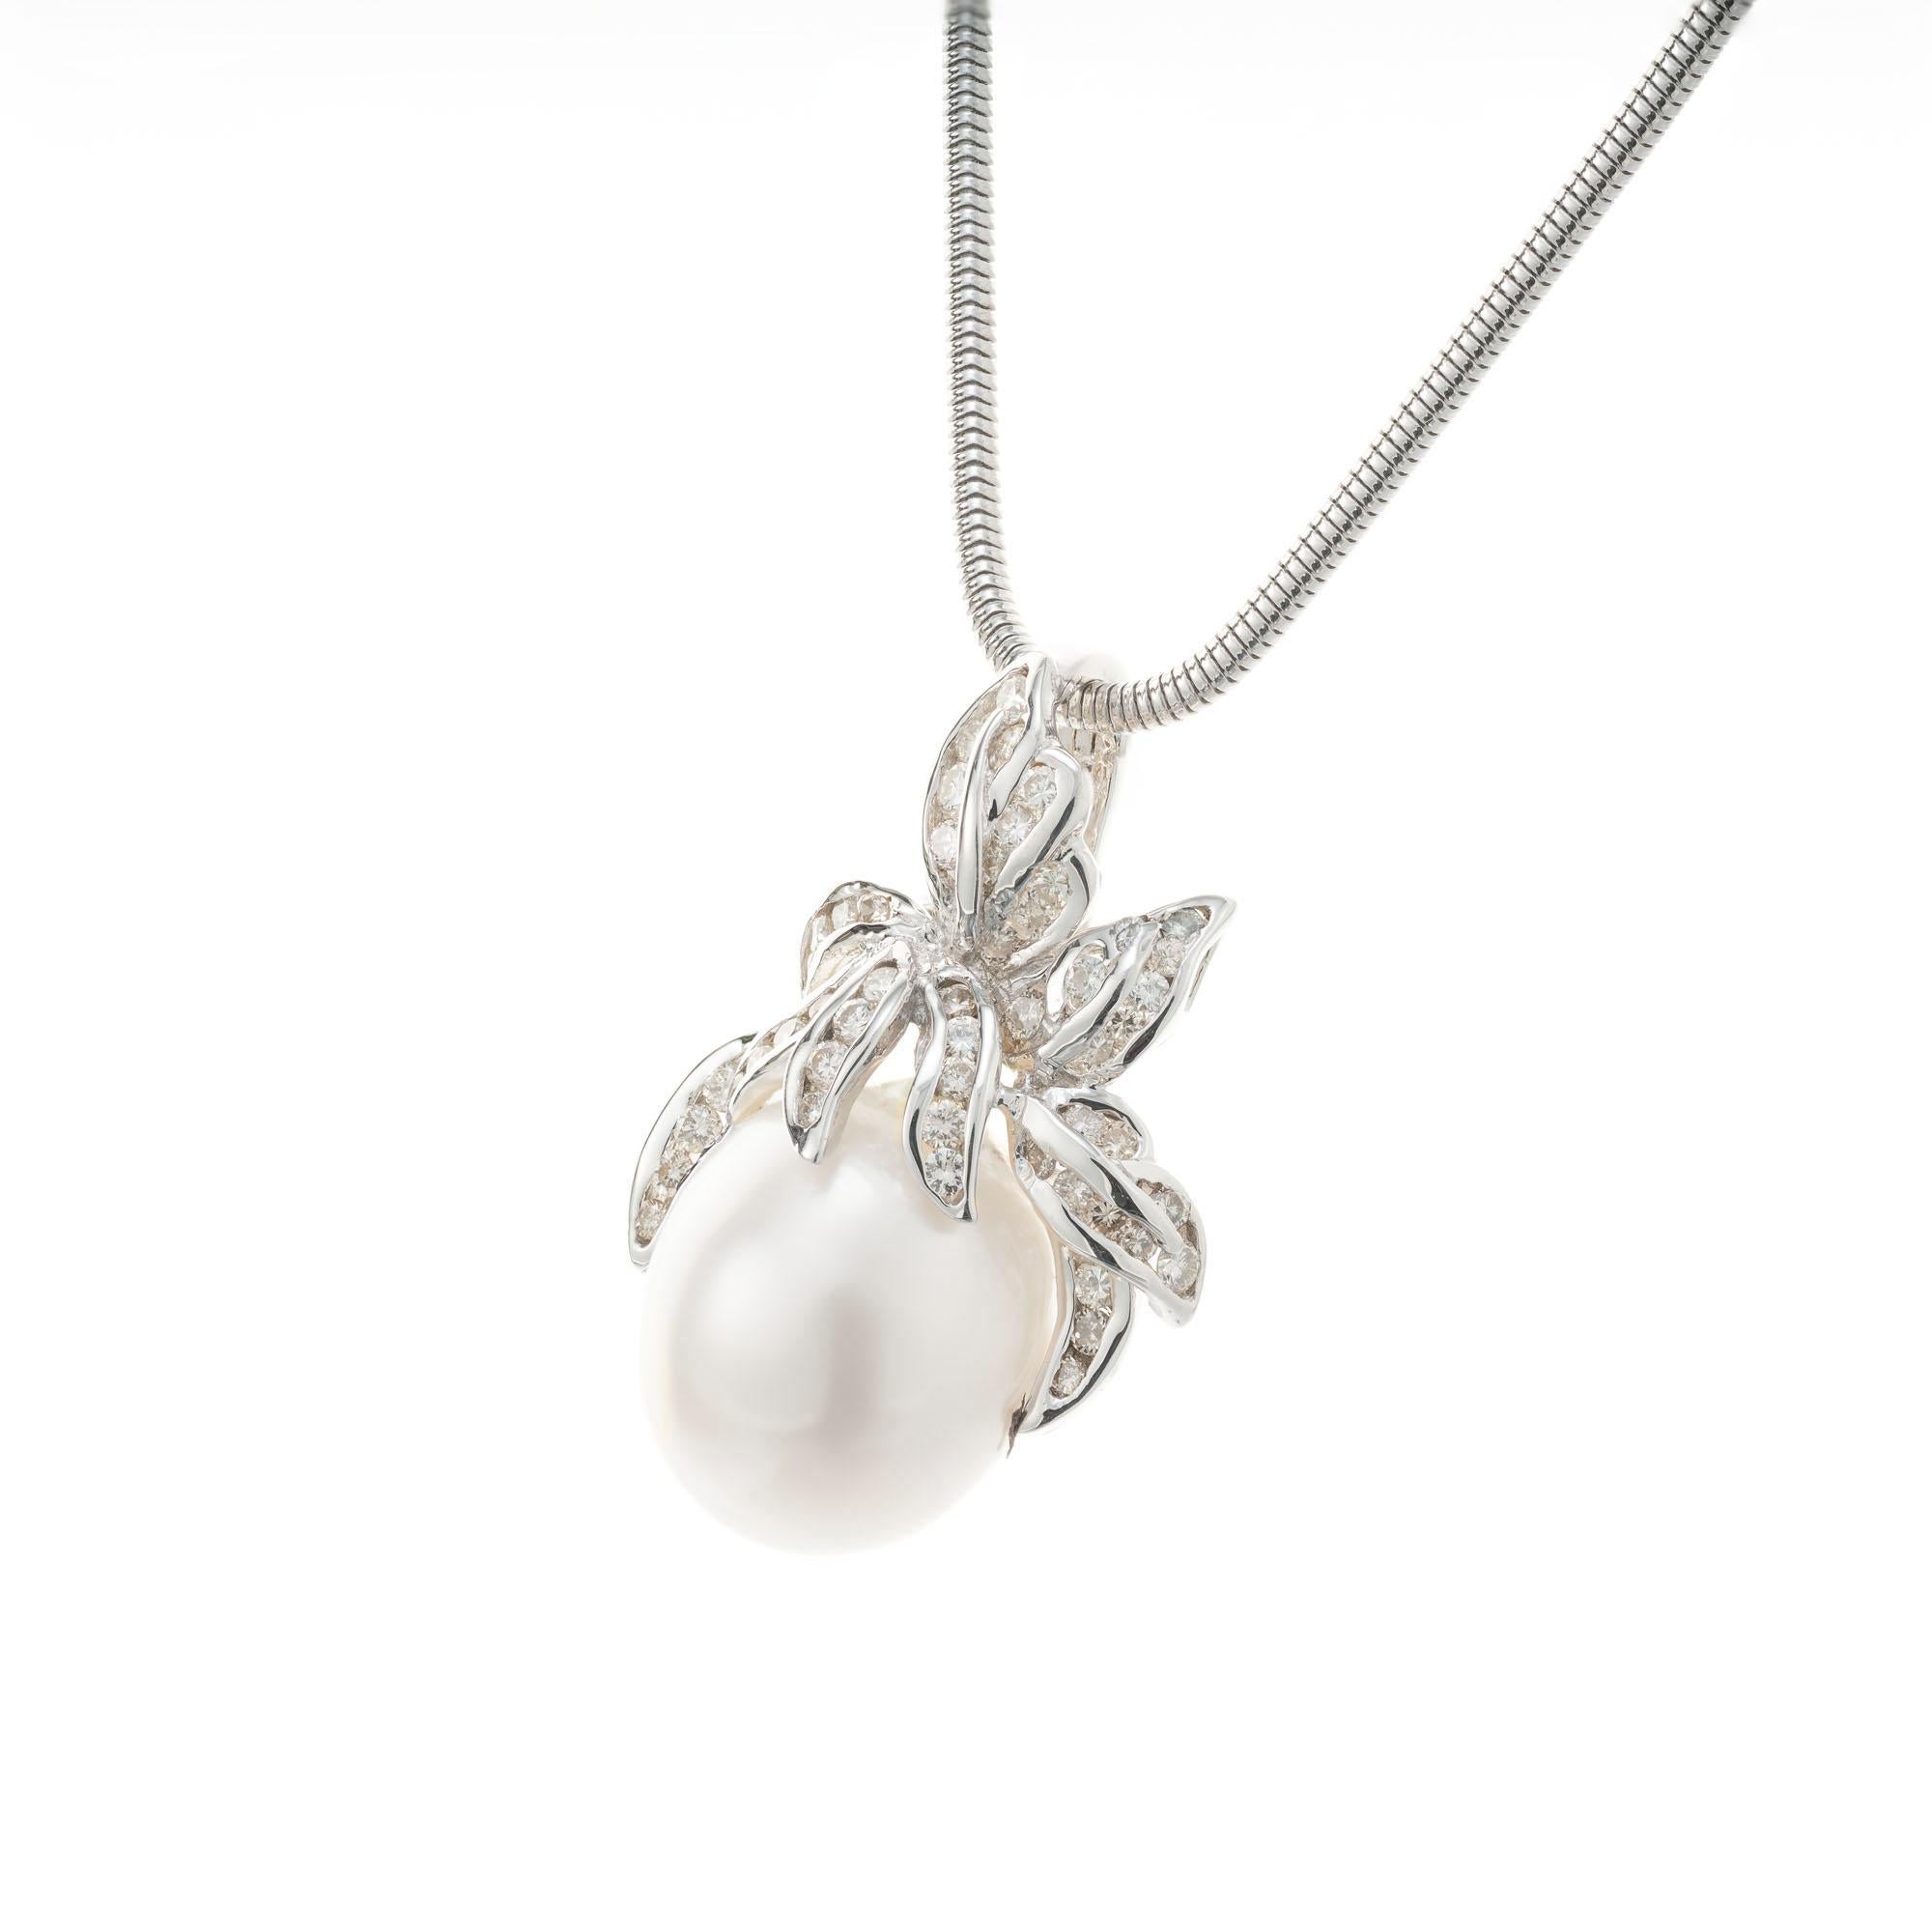 South Sea cultured pearl pendant with a swirl diamond top on an 18k white gold snake 18 inch chain. The pendant top hinges open to go over pearls as well. 

1 Baroque South Sea pearl, white grey hue, good lustre slight blemishes. 15.5mm x 12.8mm
53